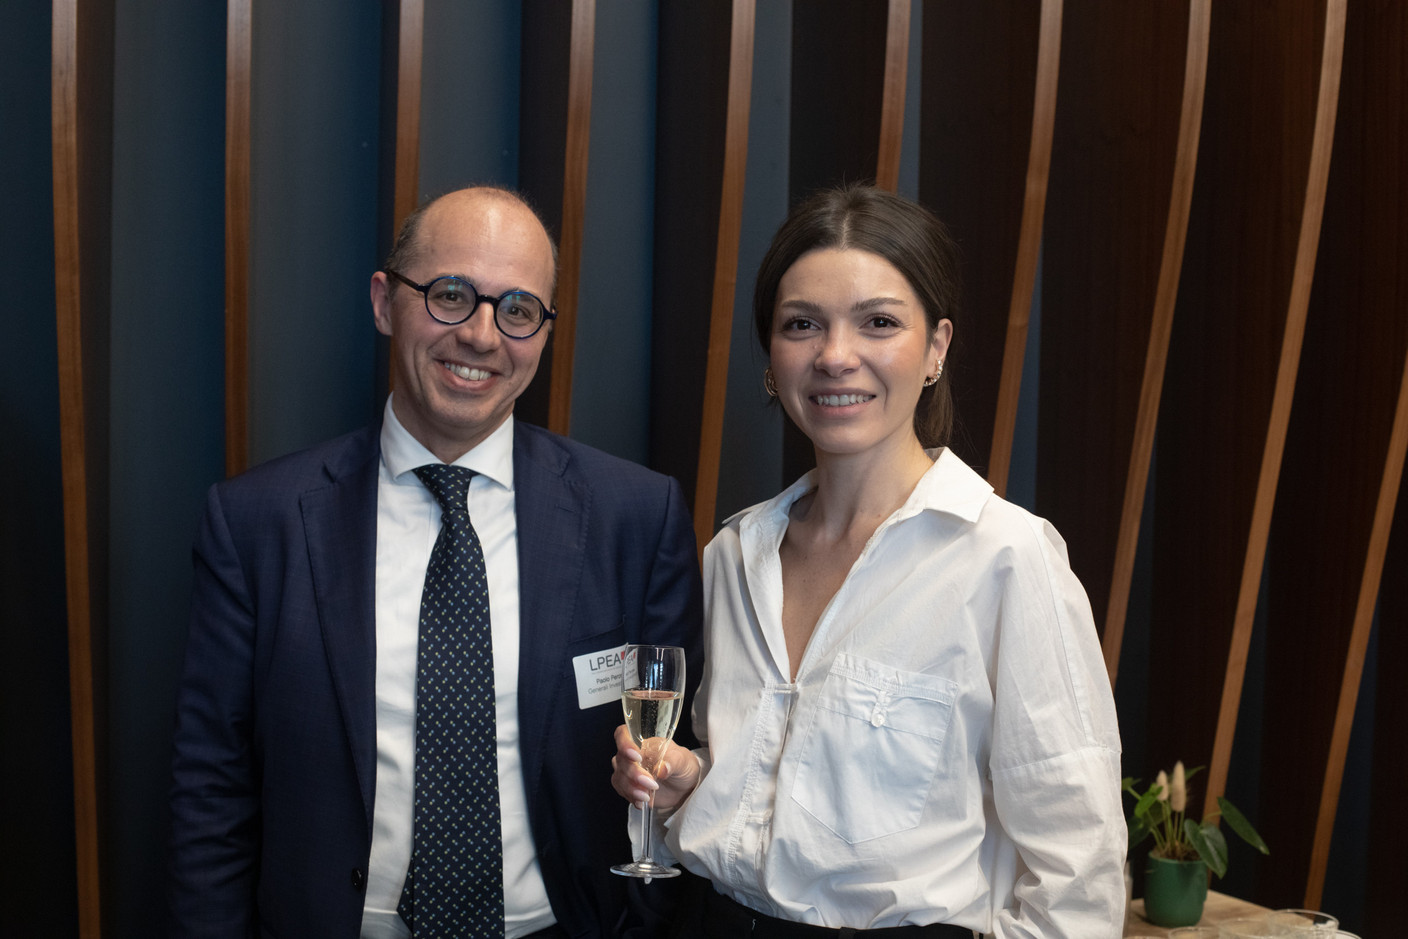 Paolo Peroni (Generali Investments) and Macide Candan (Elvinger Hoss Prussen) at the transfer pricing event organised by the LPEA on 3 May. Photo: Matic Zorman / Maison Moderne